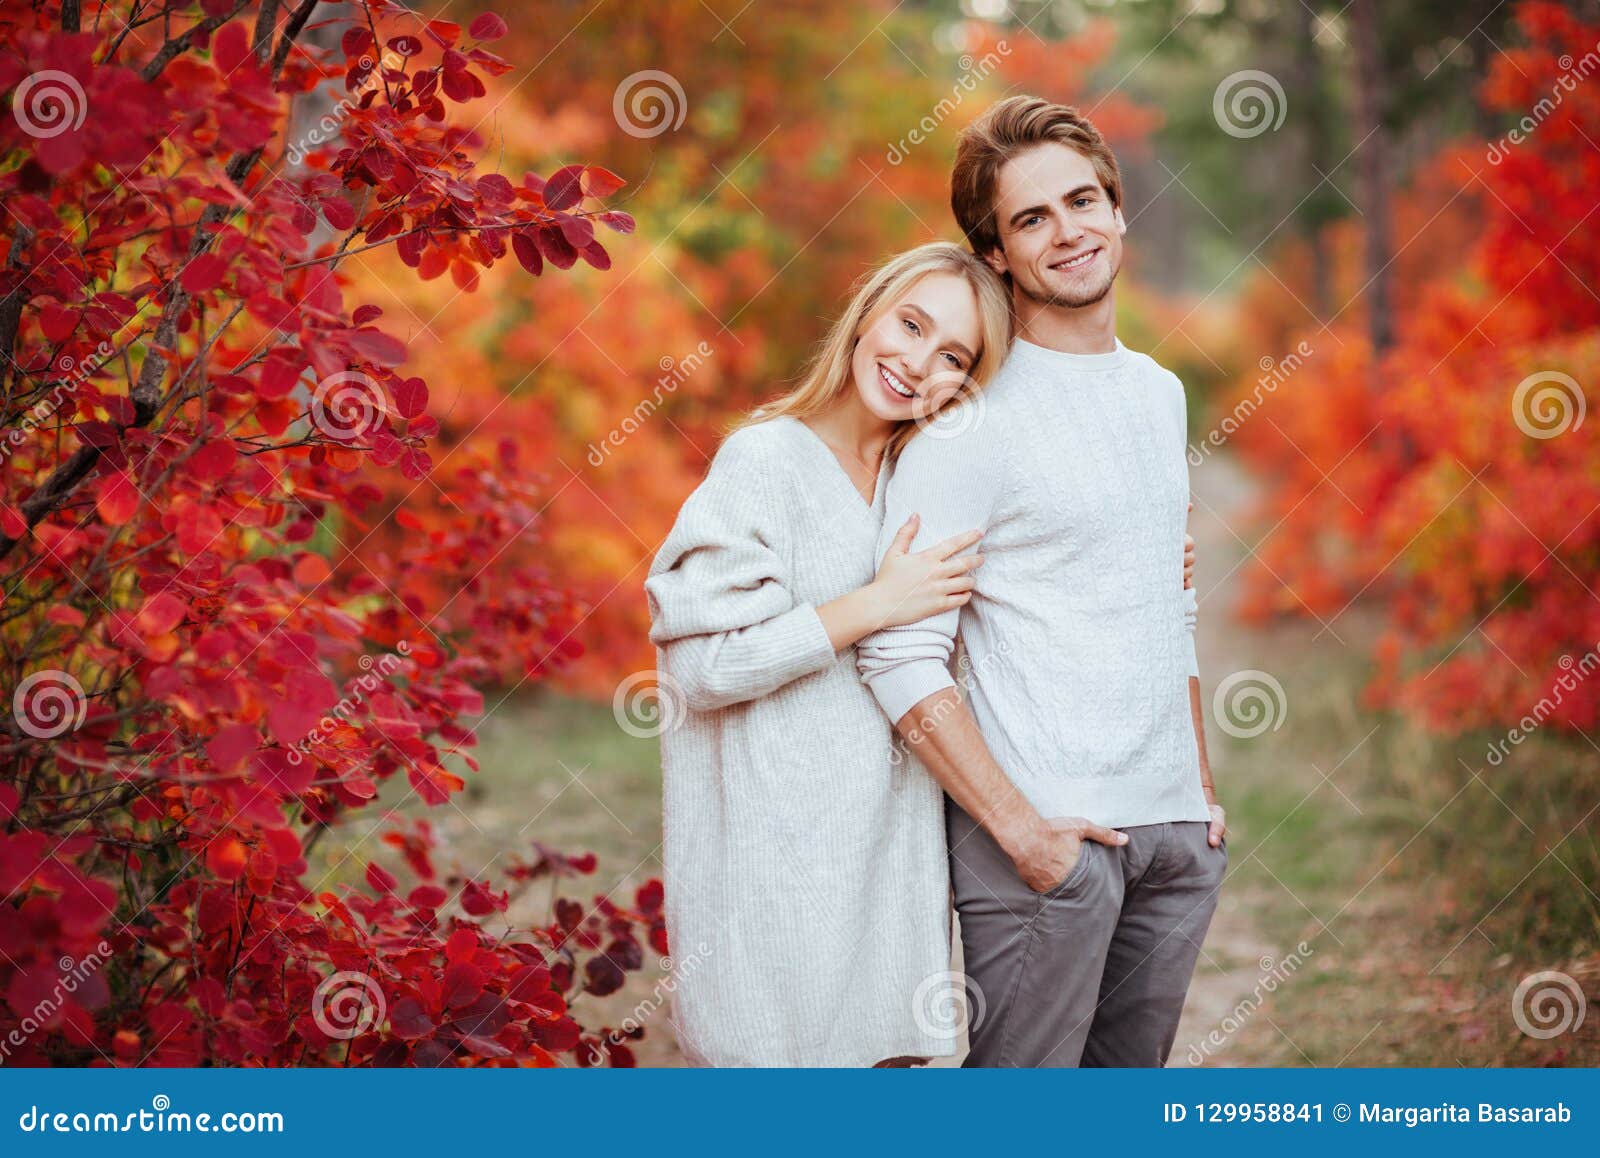 Loving Couple In The Autumn Park Stock Image Image Of Holidays